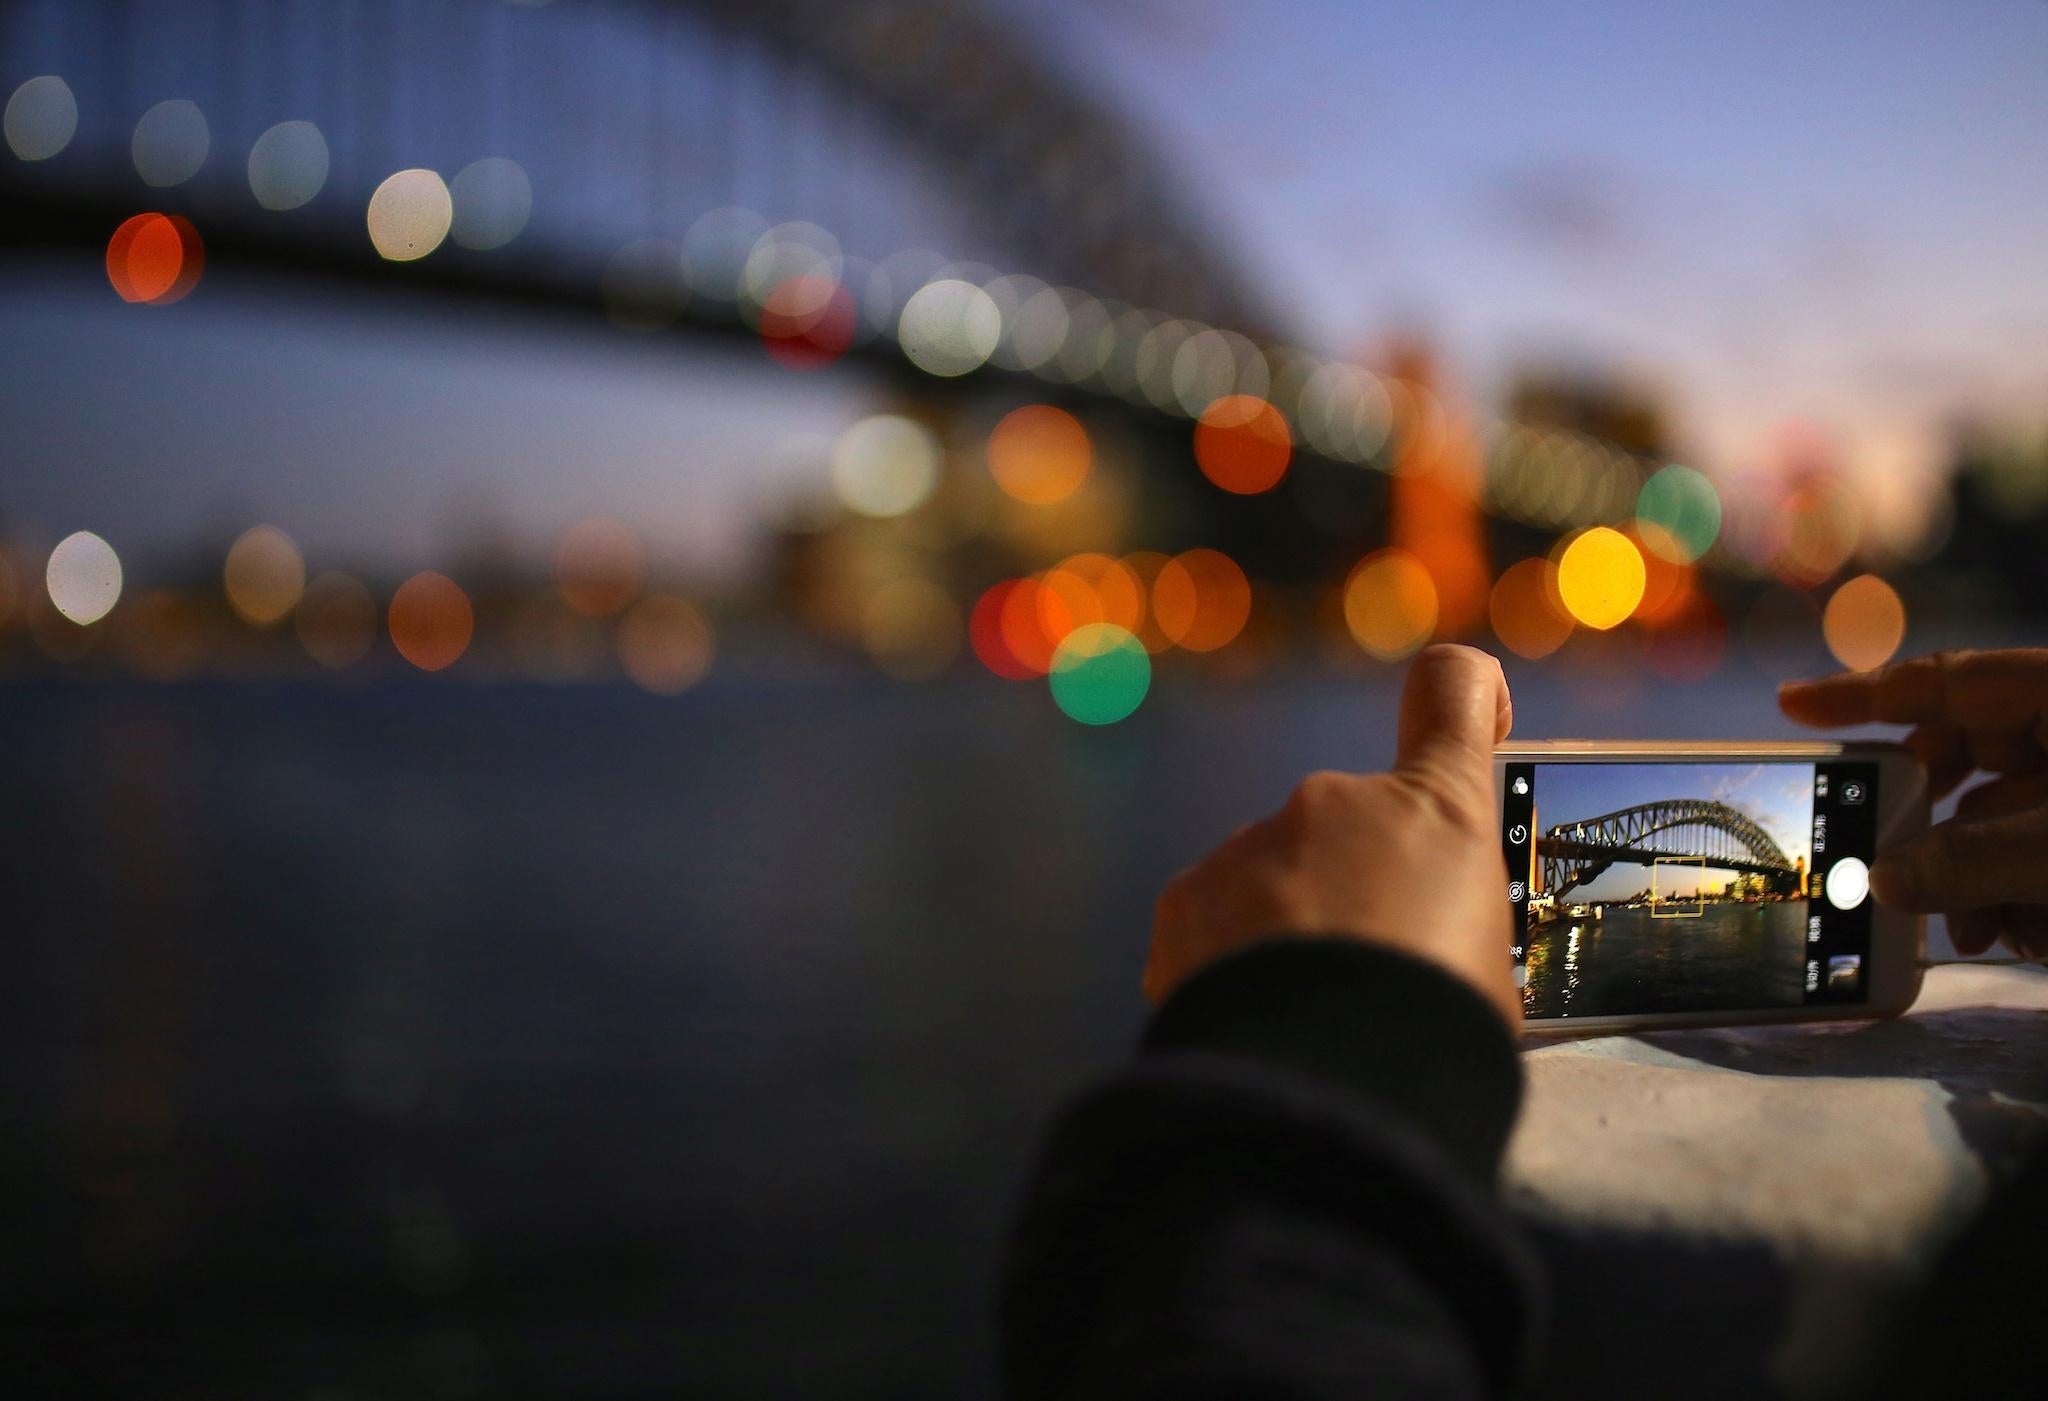 A tourist takes a photograph on their iPhone of the Sydney Harbour Bridge at sunset on a spring day in central Sydney, Australia, November 8, 2017